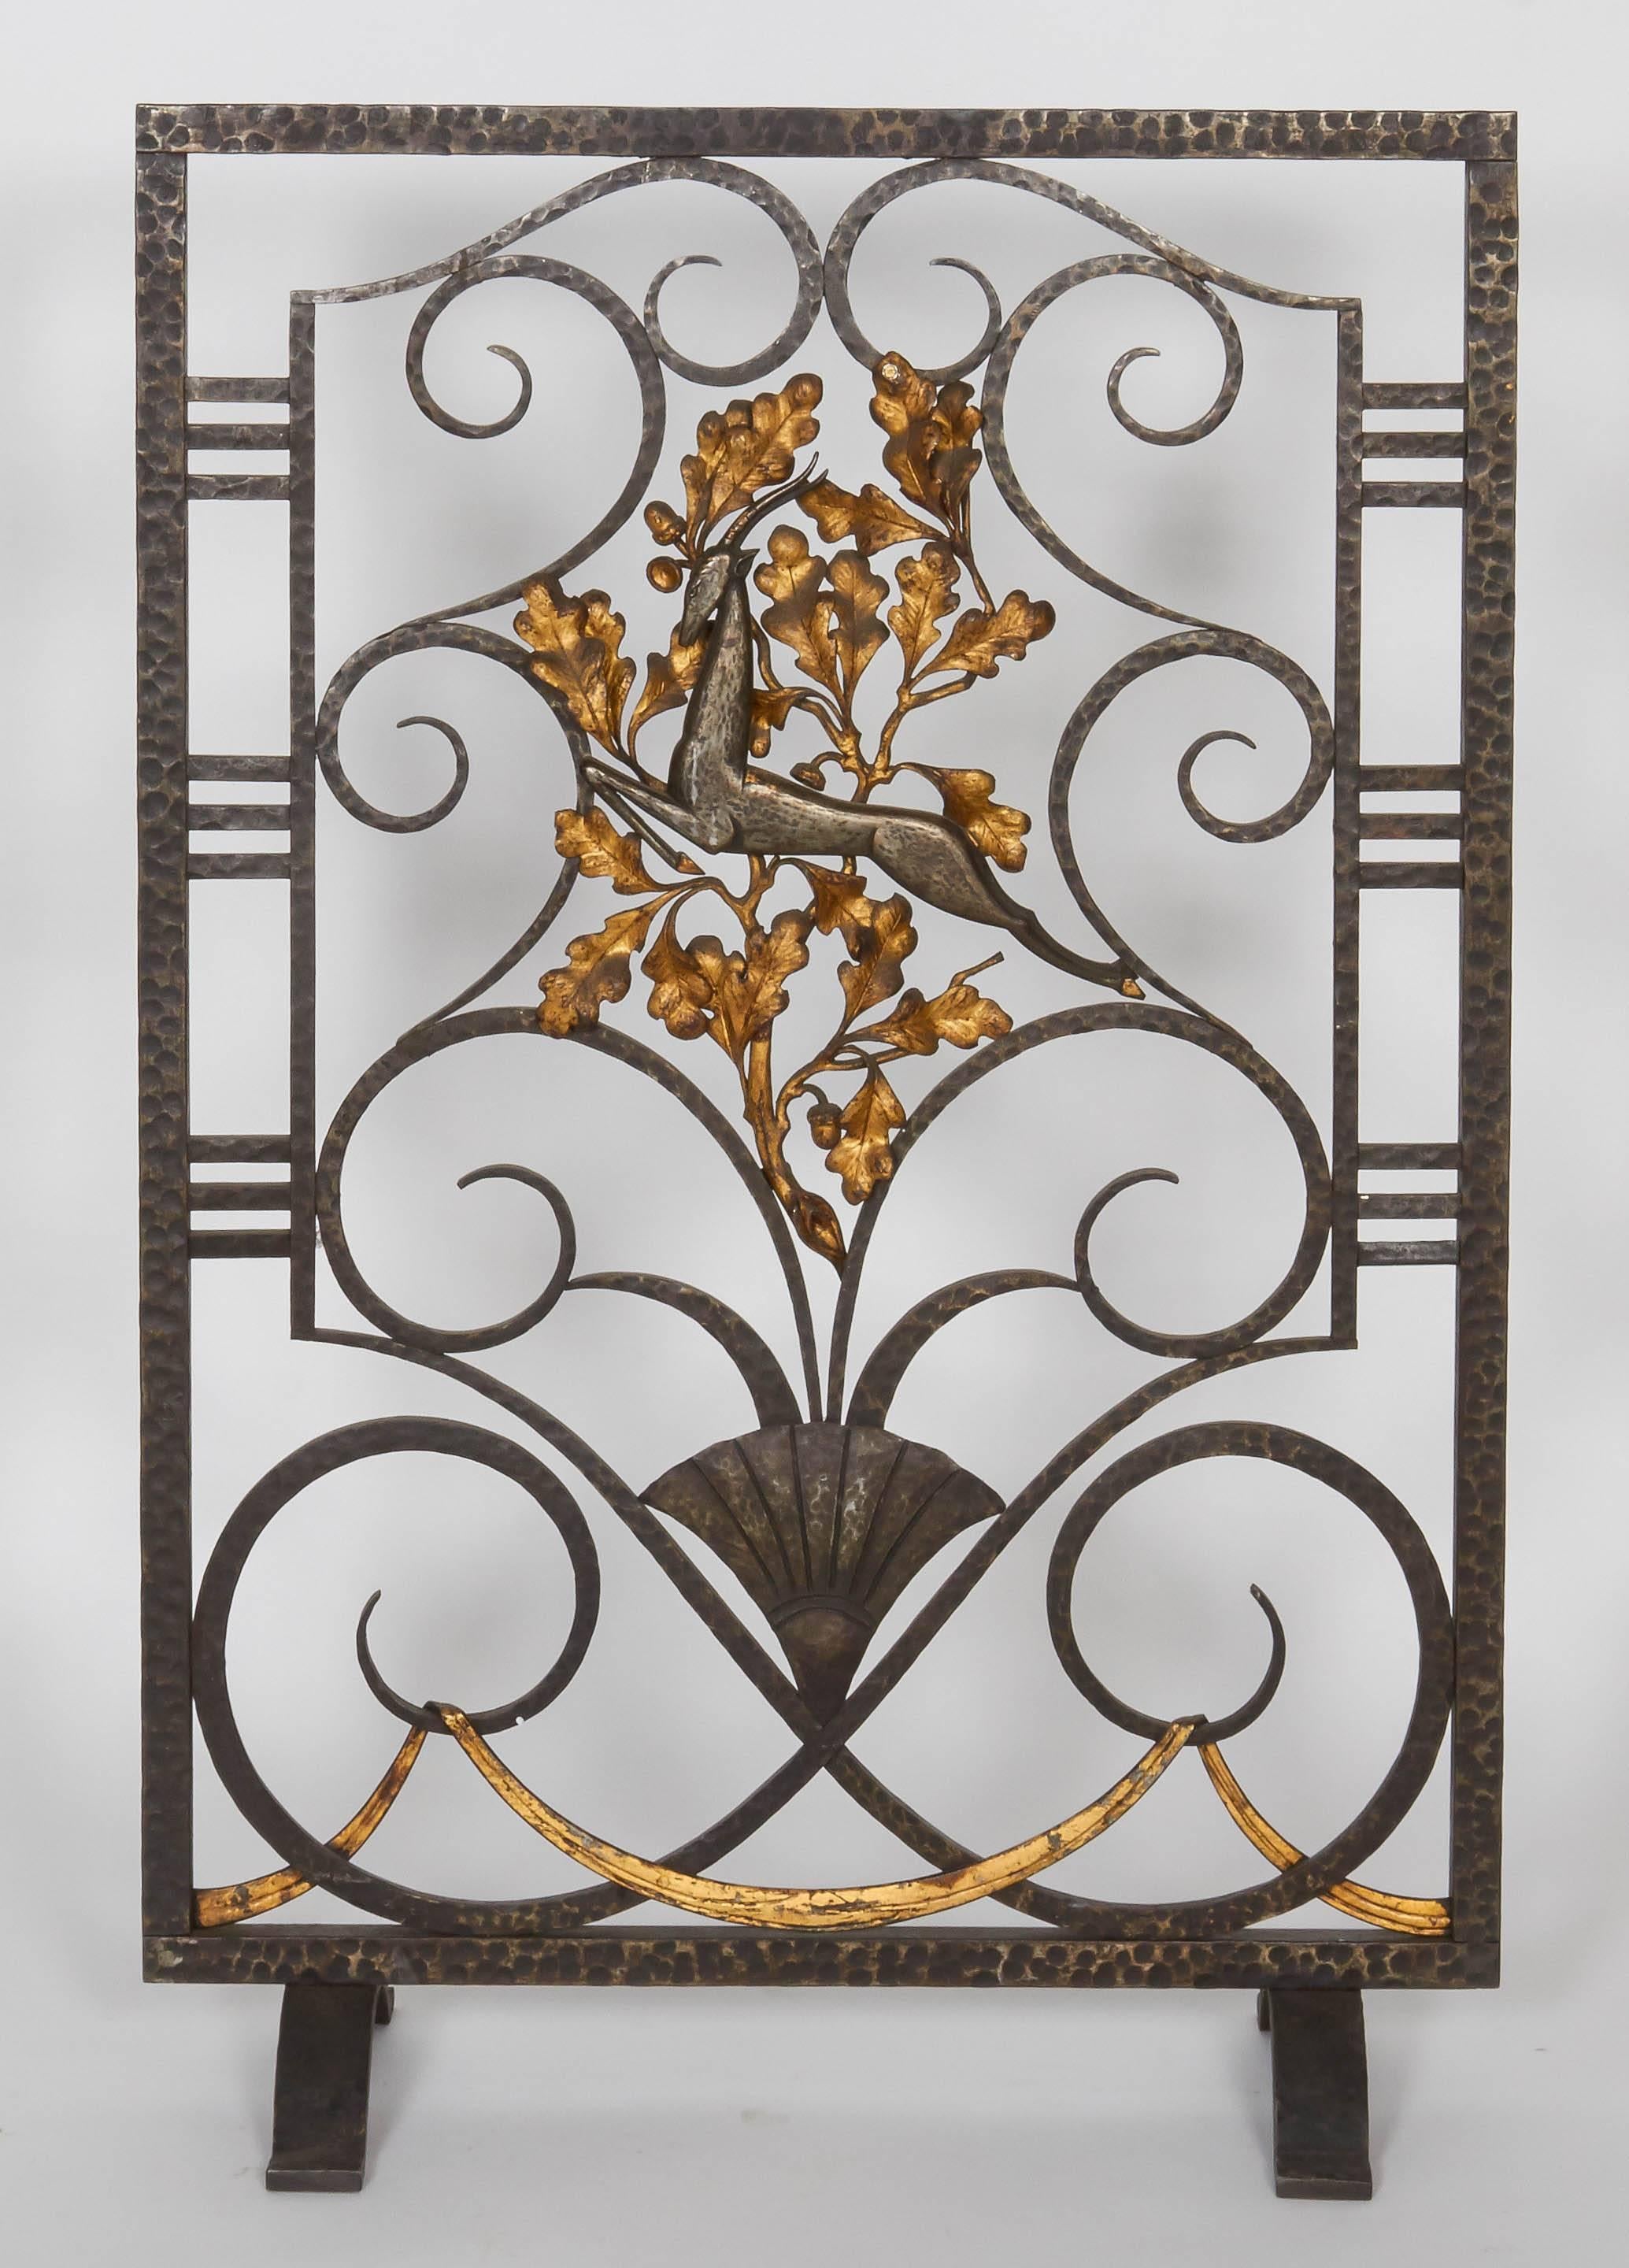 Wrought iron fire screen by Edgar Brandt.
Black patina with gilded accents.
Measures: Height: 32